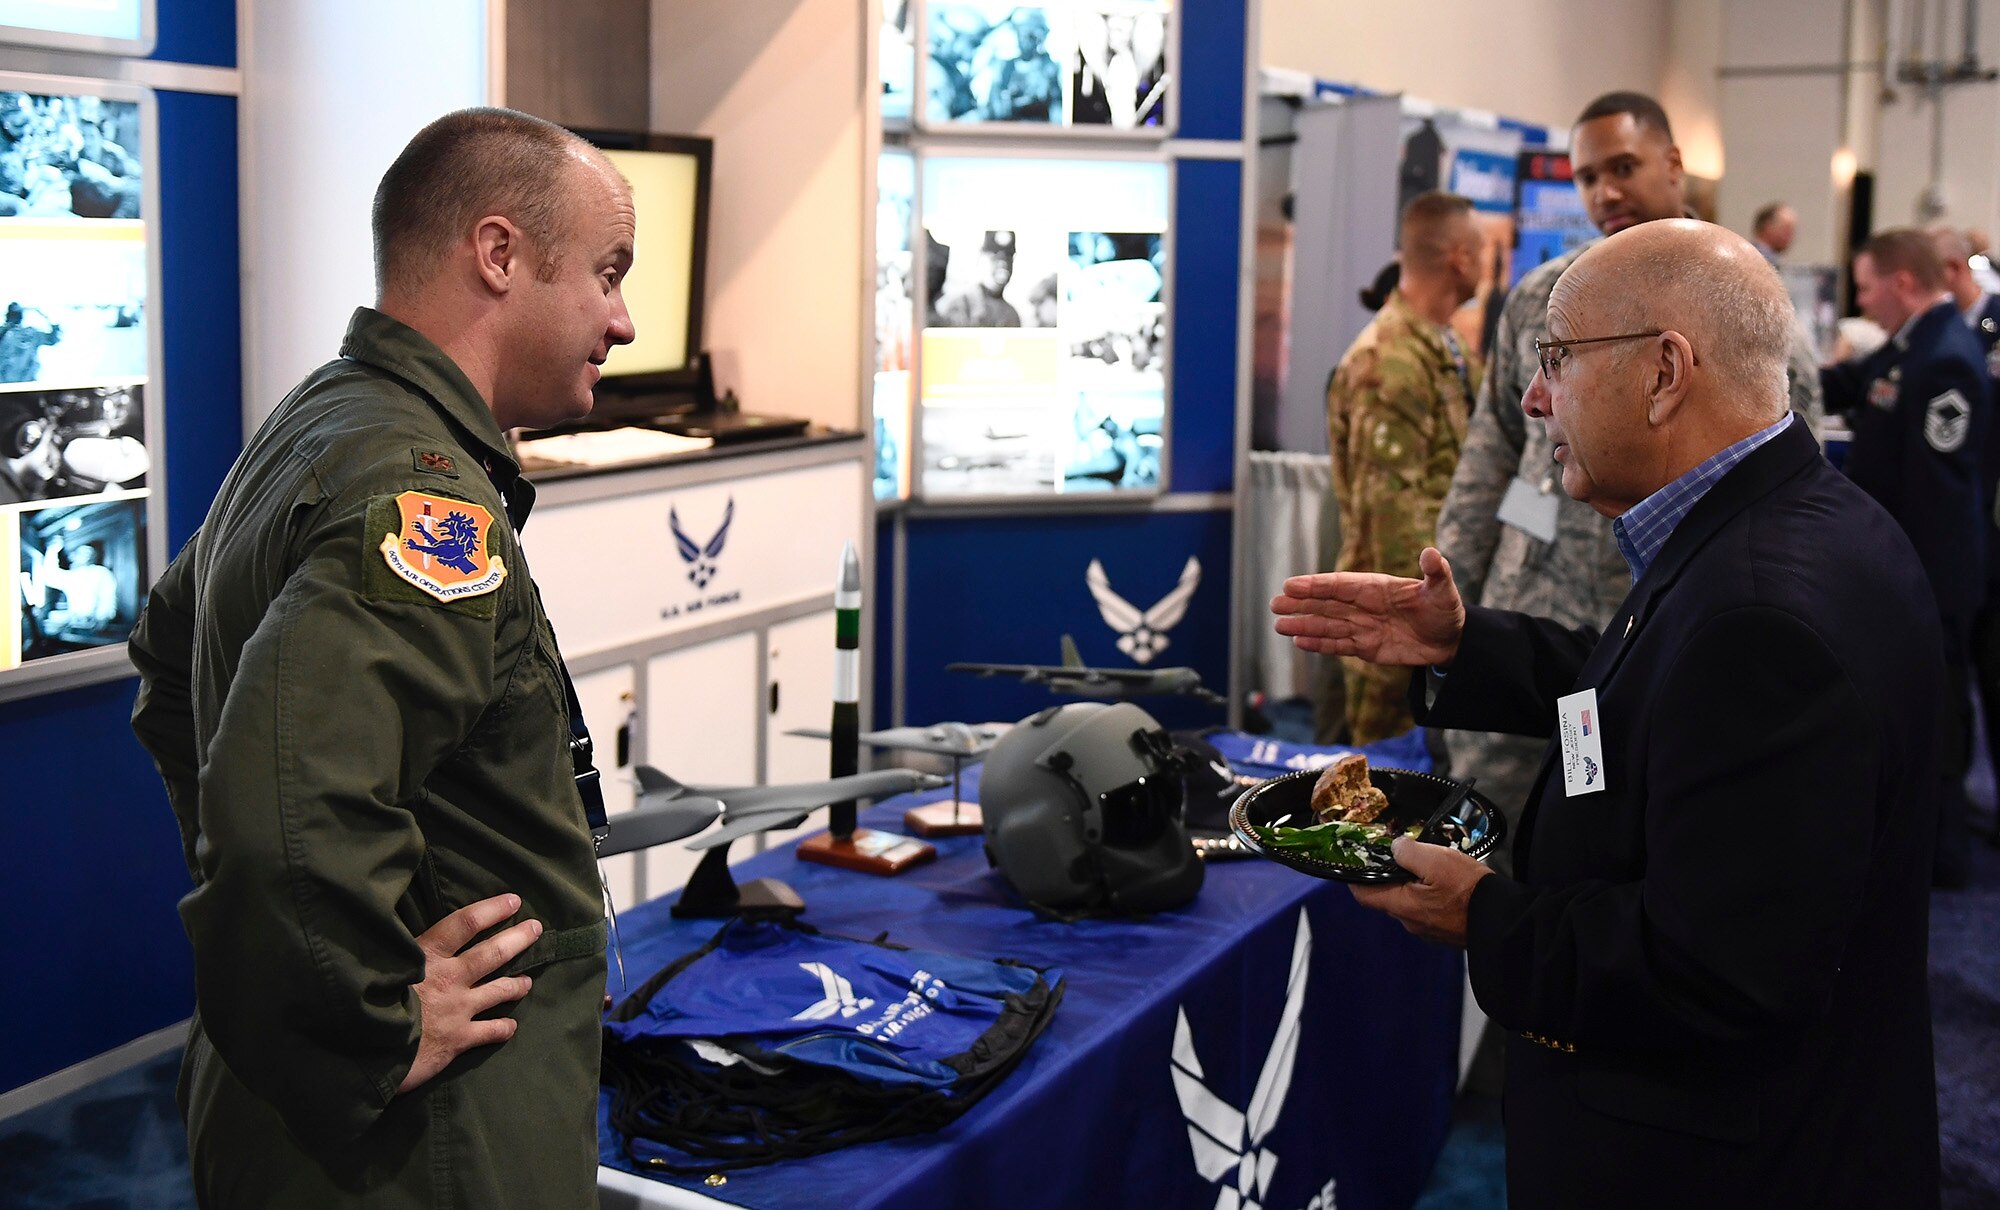 Airmen from Air Force Global Strike Command discuss their experiences and military backgrounds with those attending the Air Force Association’s Air, Space and Cyber Conference at National Harbor, Md., Sept. 19, 2016. Three major commands, AFGSC, Air Mobility Command, and Air Education and Training Command were represented at the American Airman Booth. (U.S. Air Force photo/Tech. Sgt. Bryan Franks)
